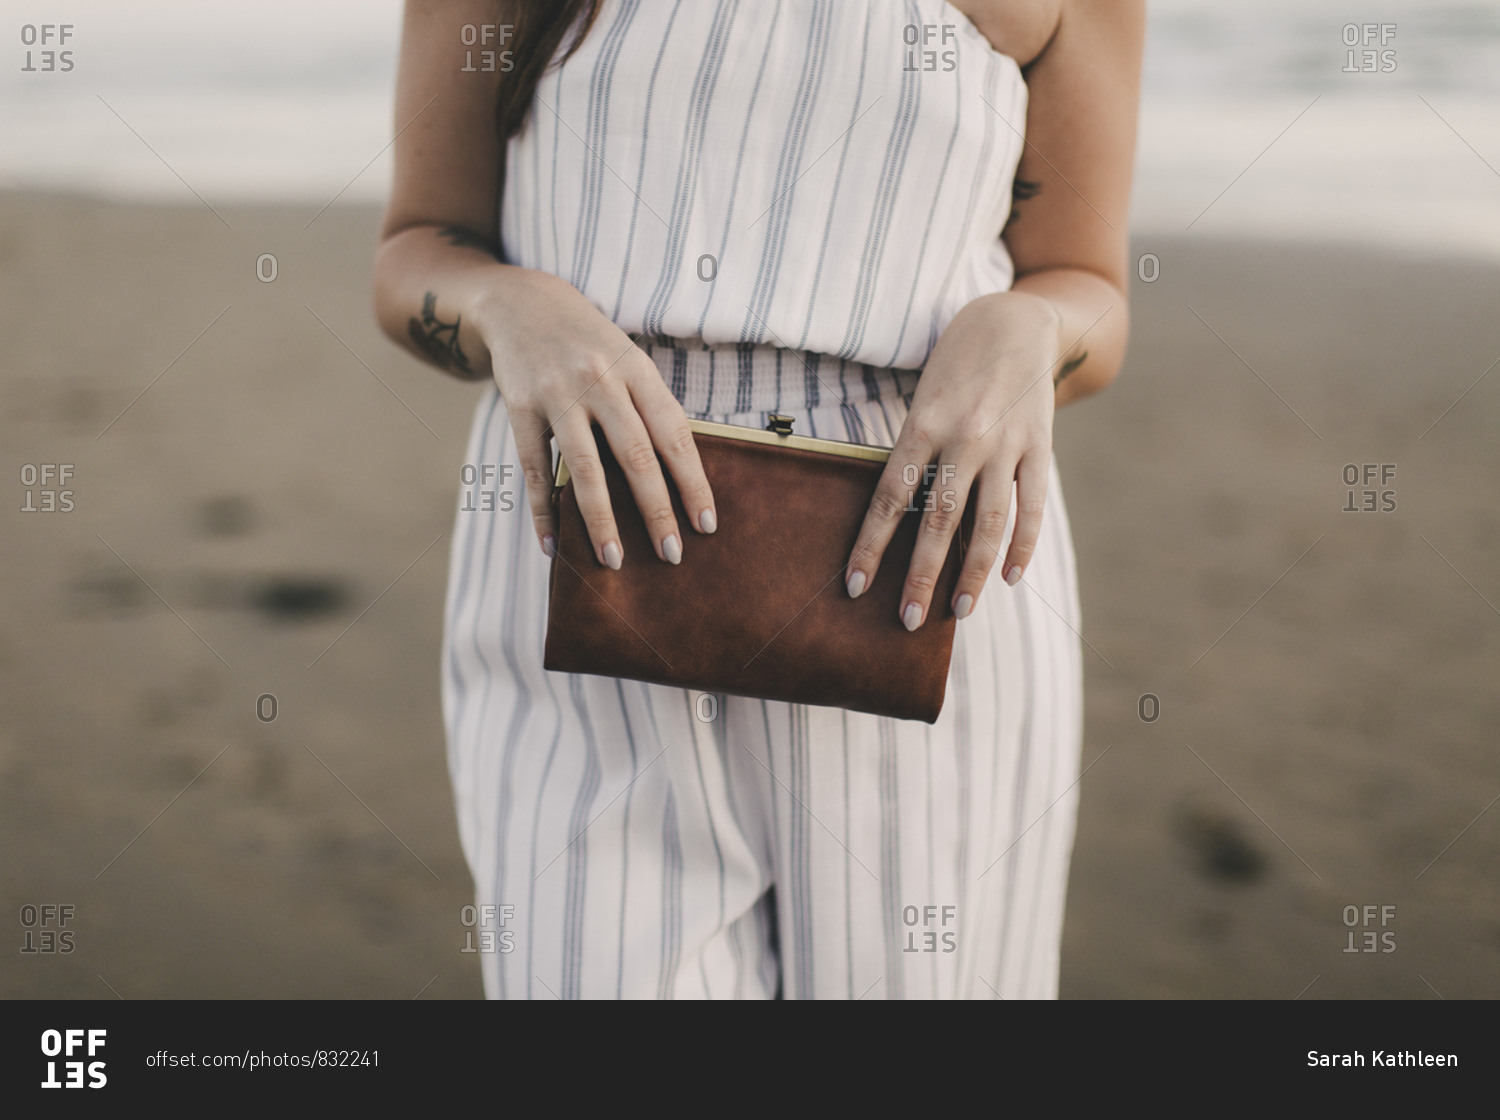 Beautiful Girl with Clutch Purse Stock Image - Image of clutch, accessory:  235271399